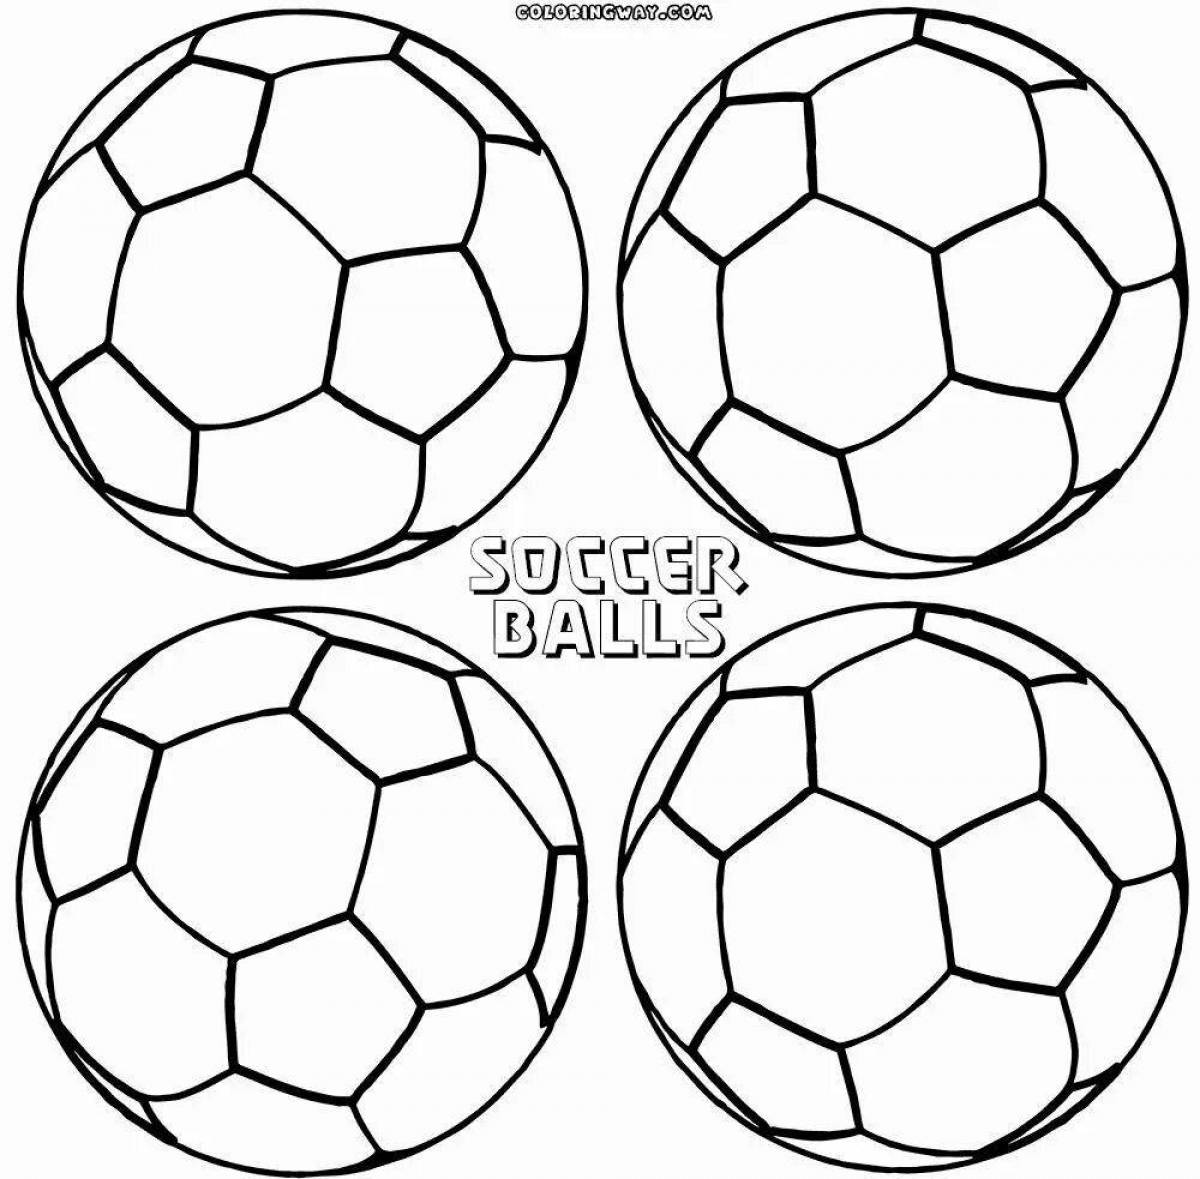 Colored soccer ball for kids